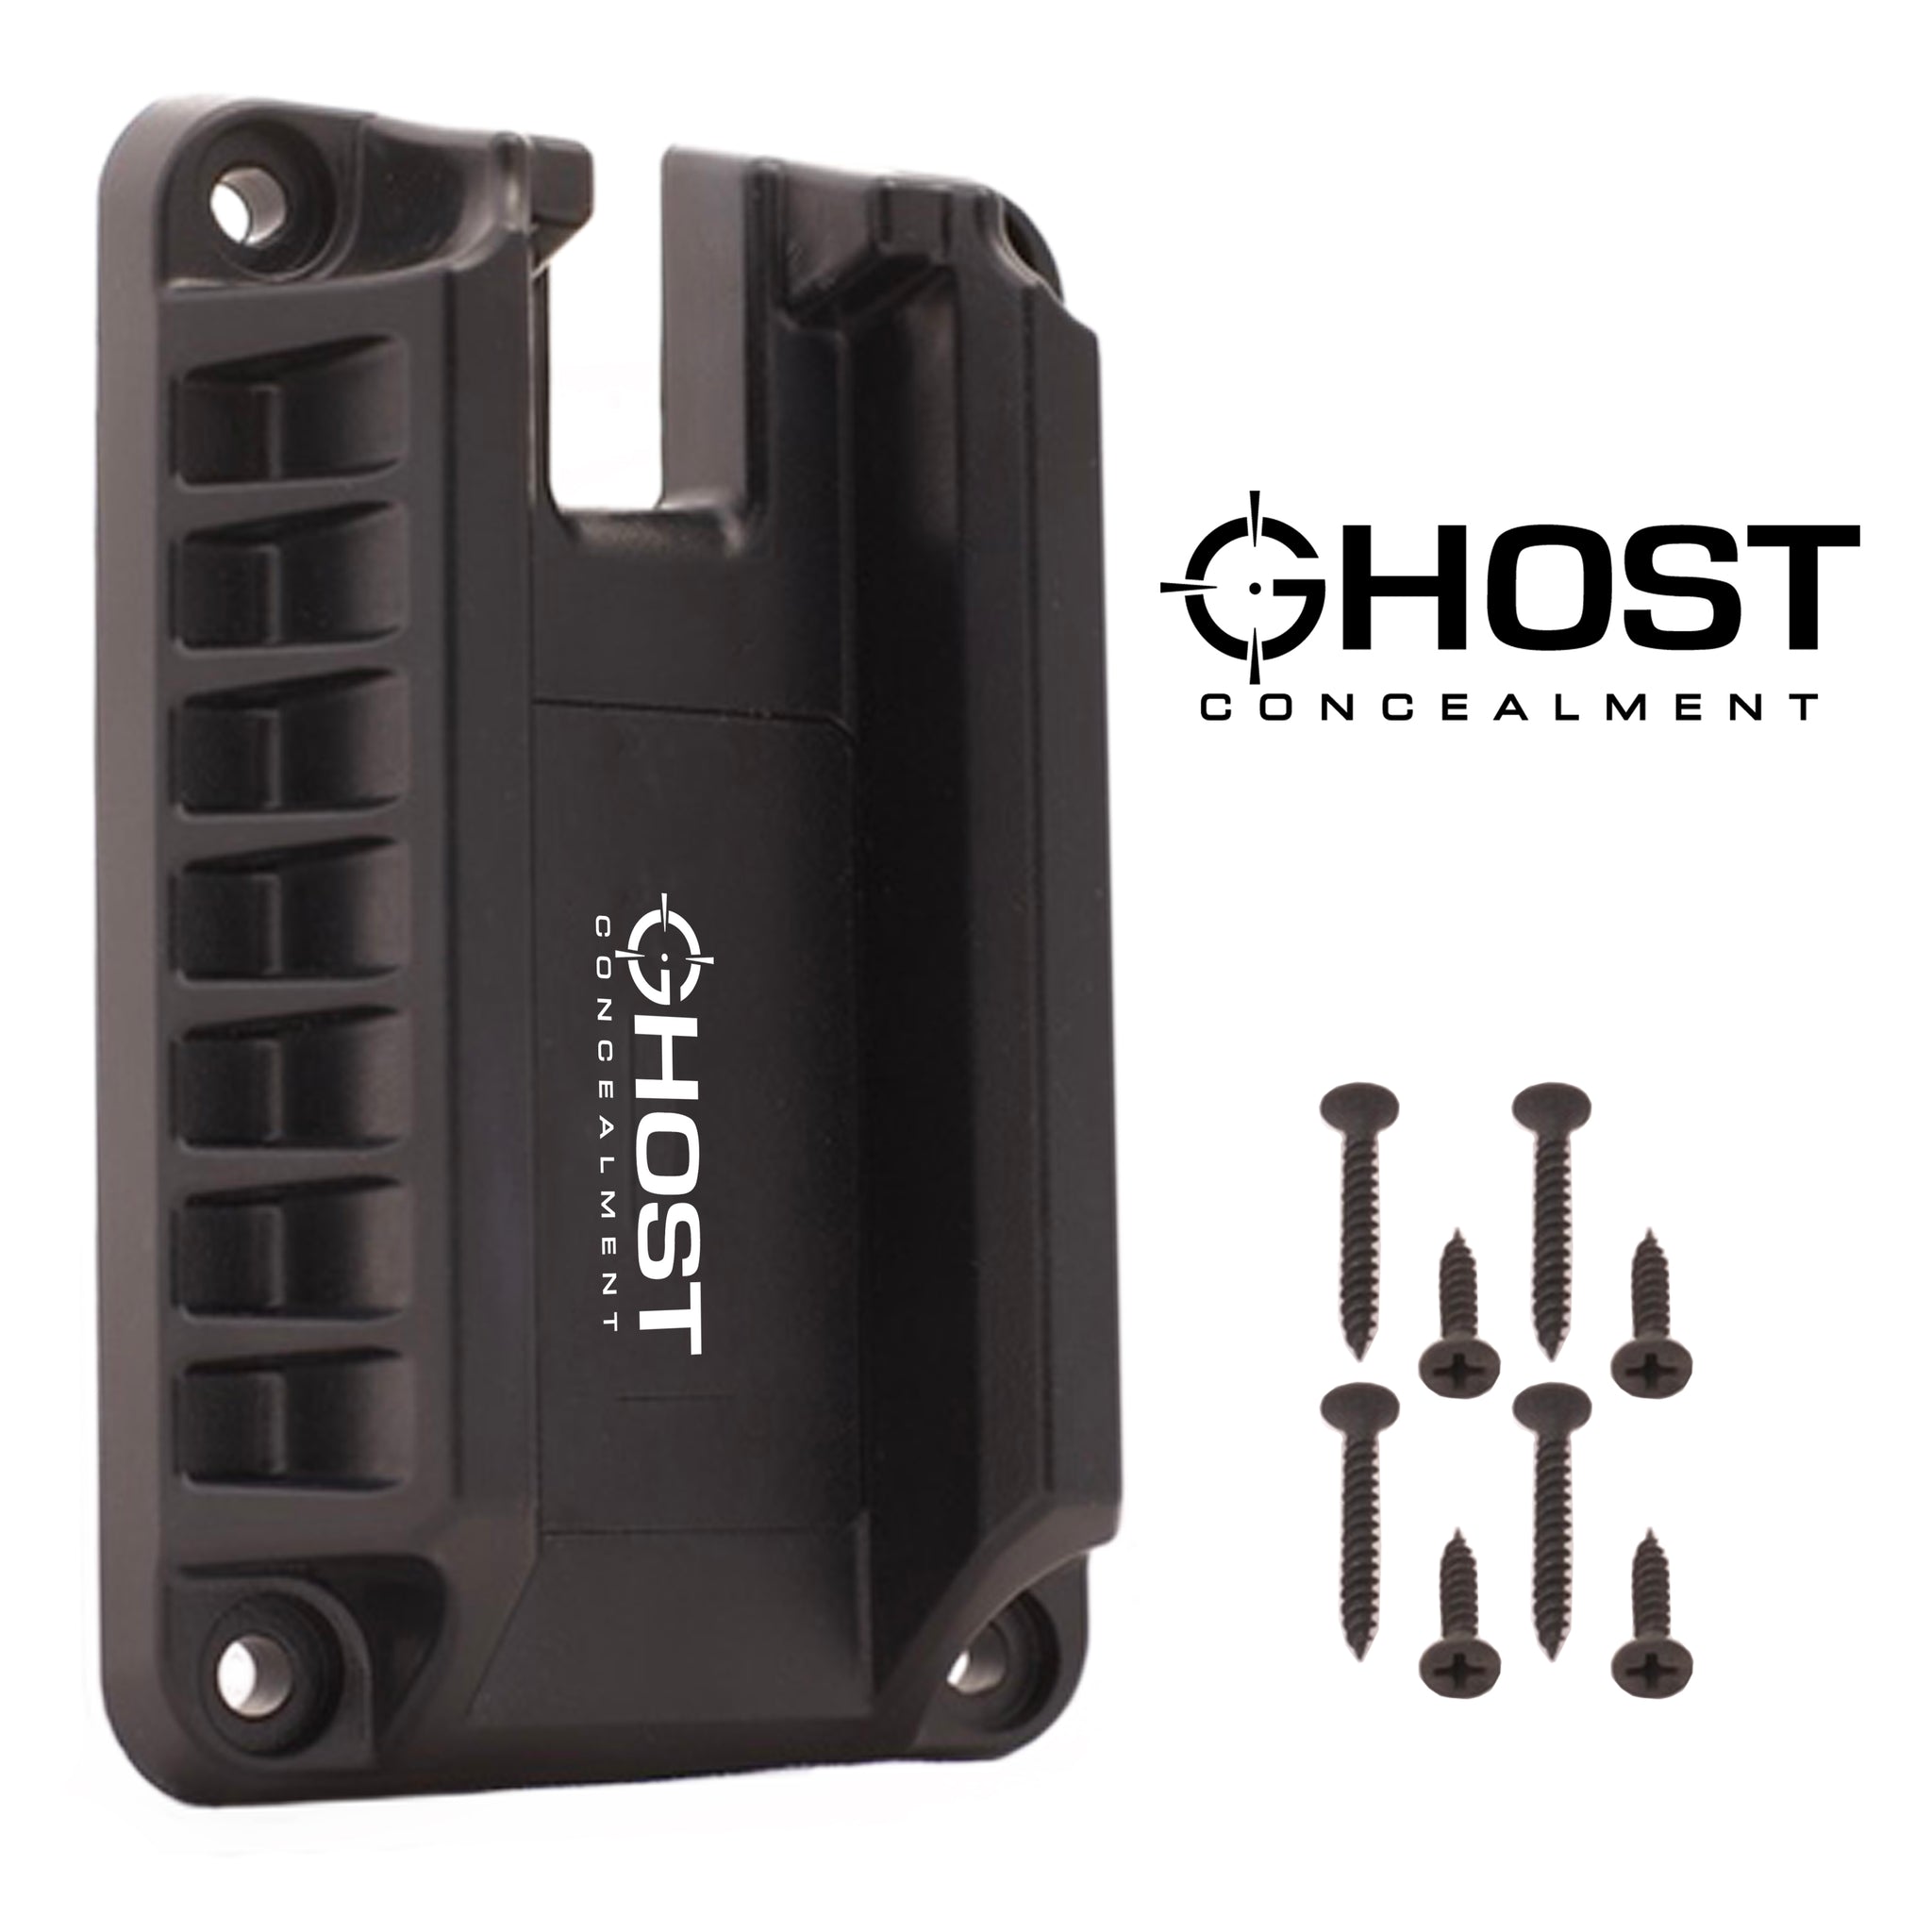 Ghost Concealment Tactical Quick Draw Gun Magnet Mount Holster Magne 0218